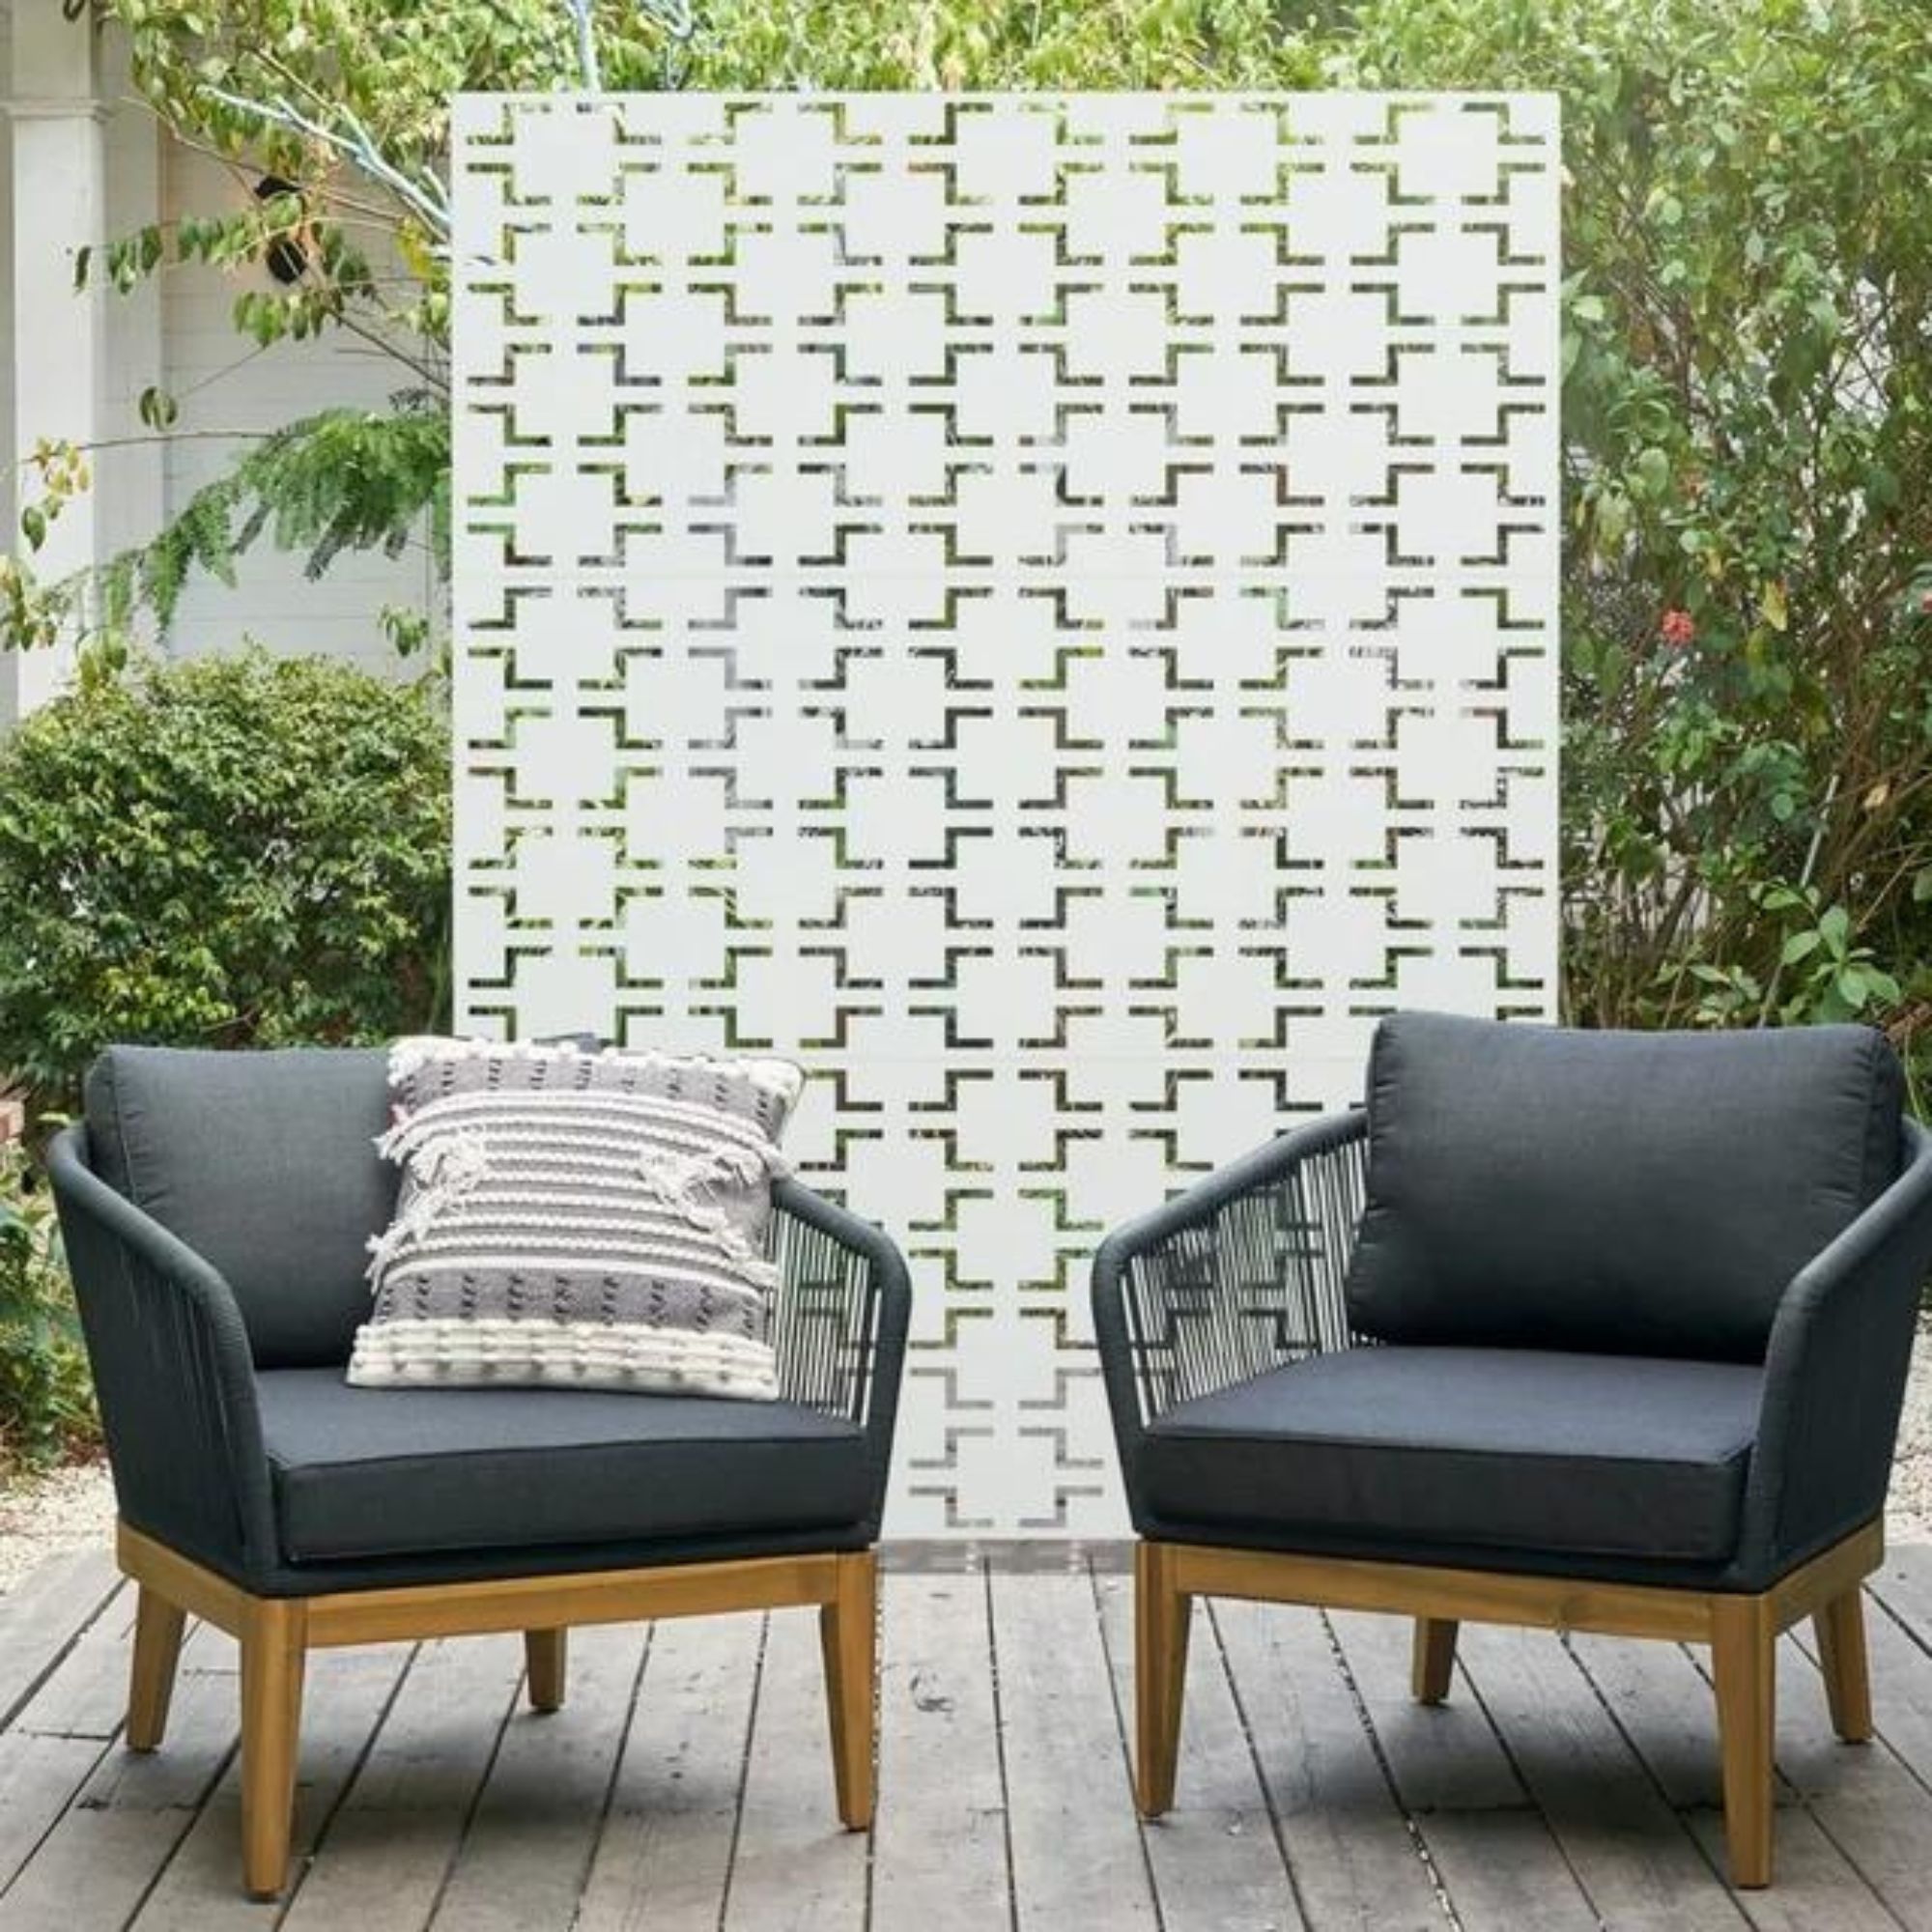 White privacy fence with geometric print